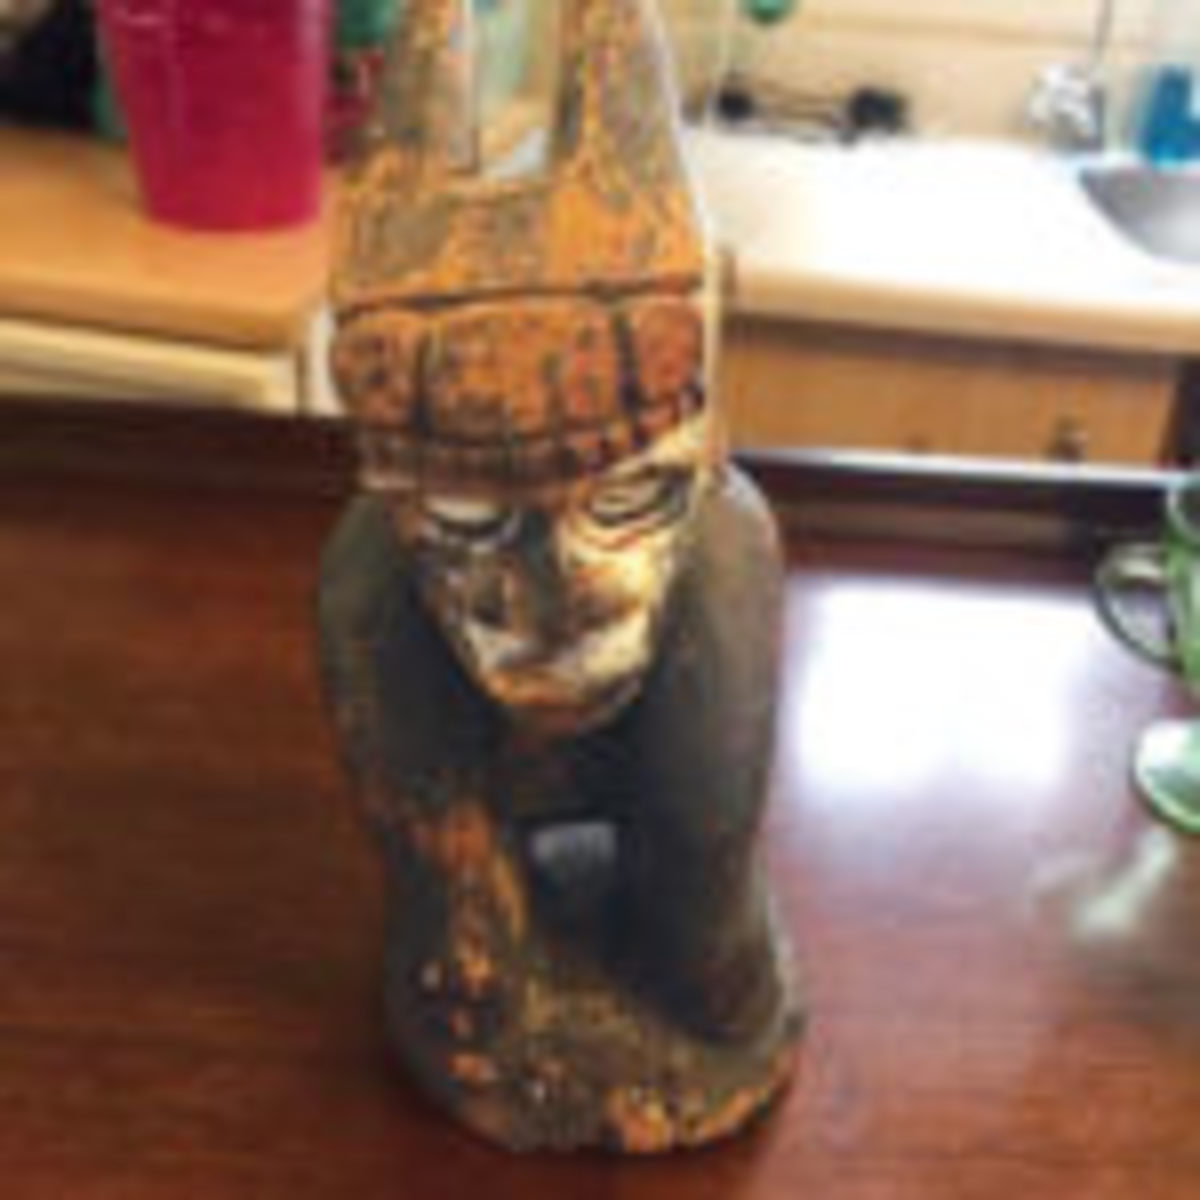 Mysterious carved figure